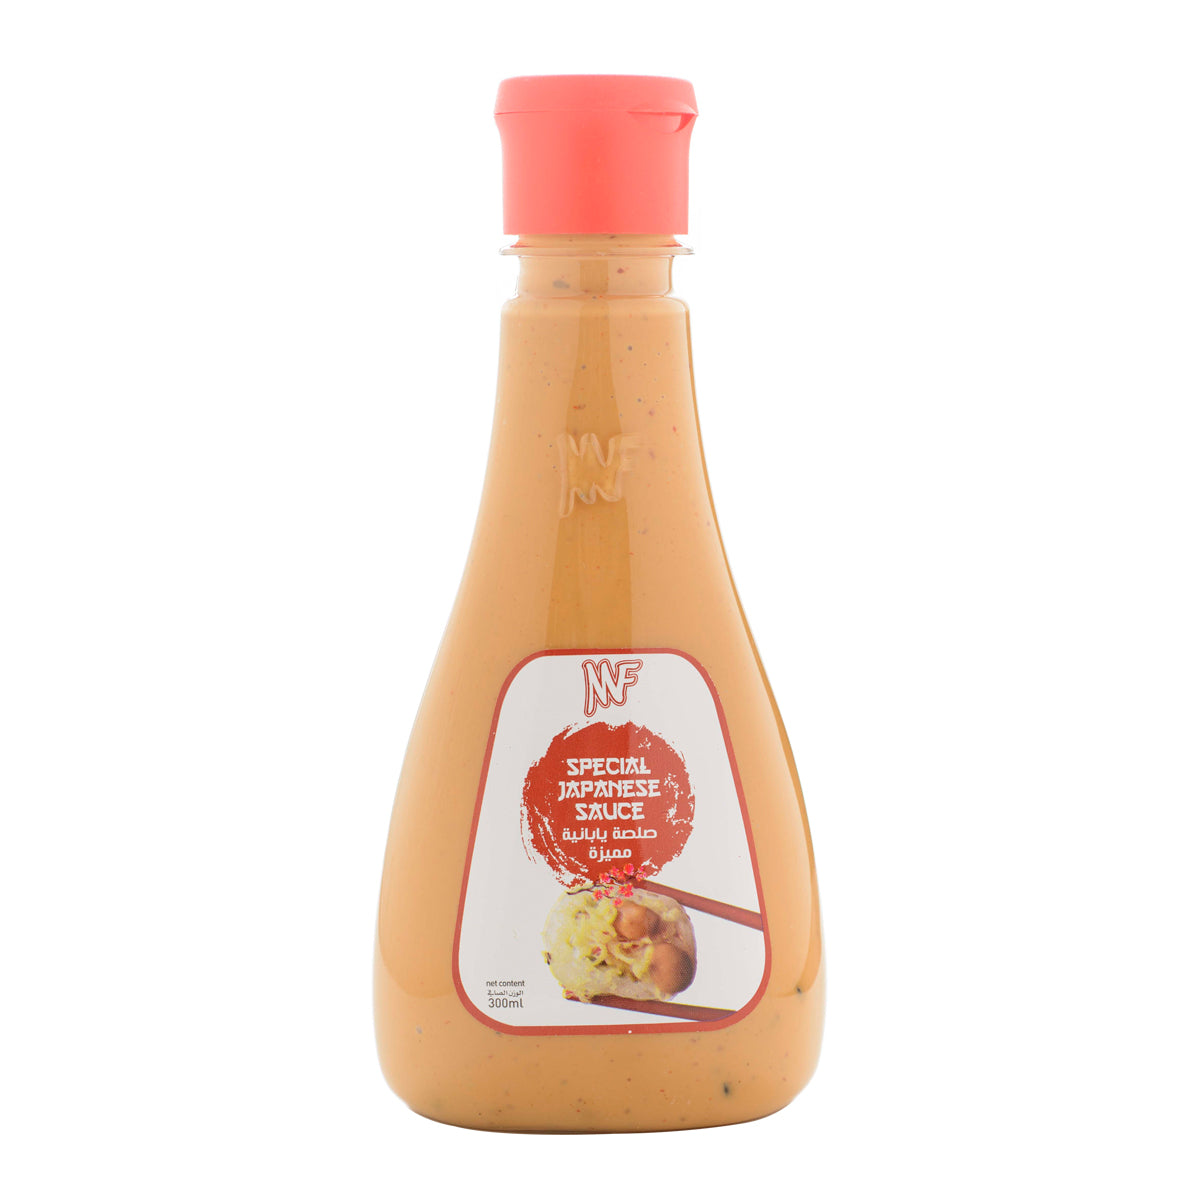 MF Special Japanese Sauce 300ml